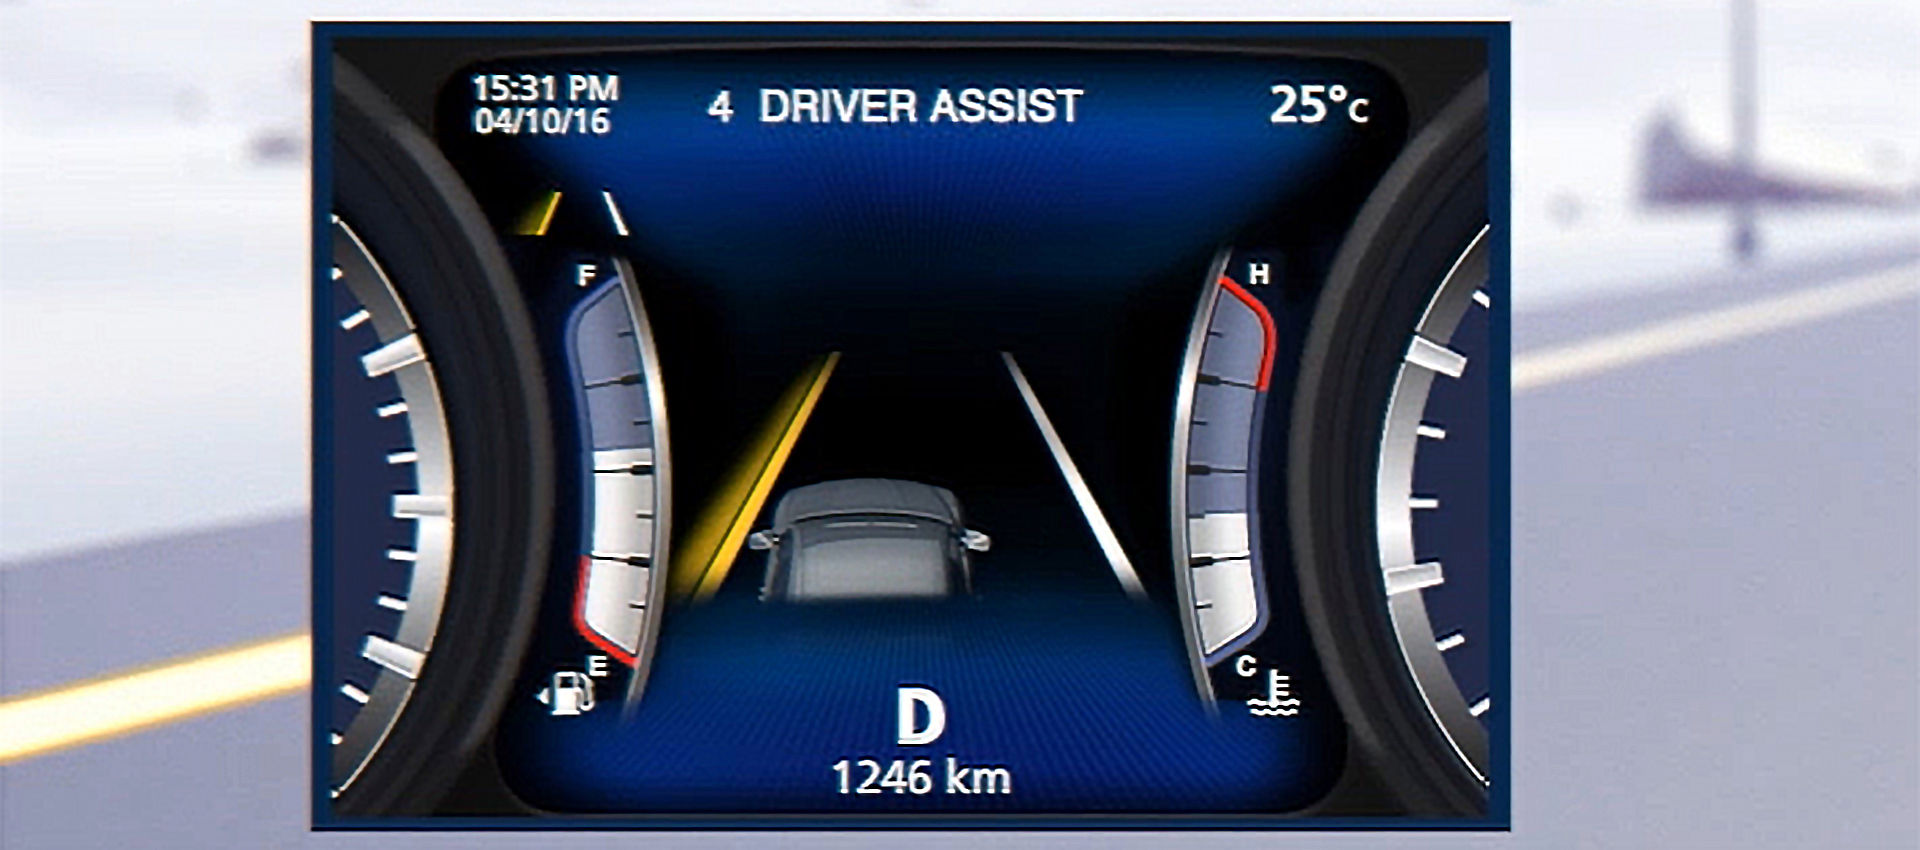 Maserati Lane Keeping Assist System - how it works